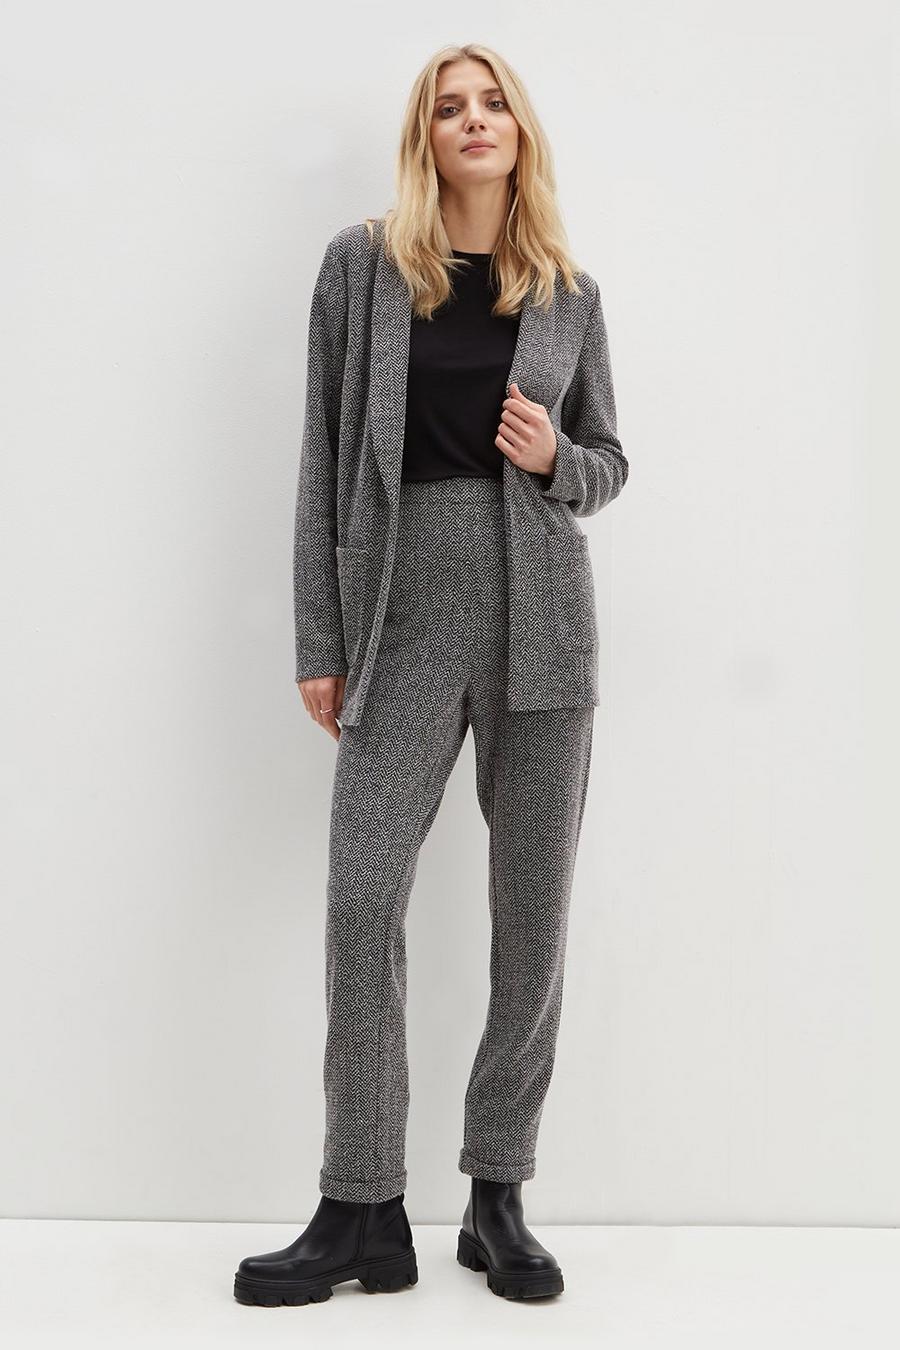 Petite Black & White Textured Pull On Trousers